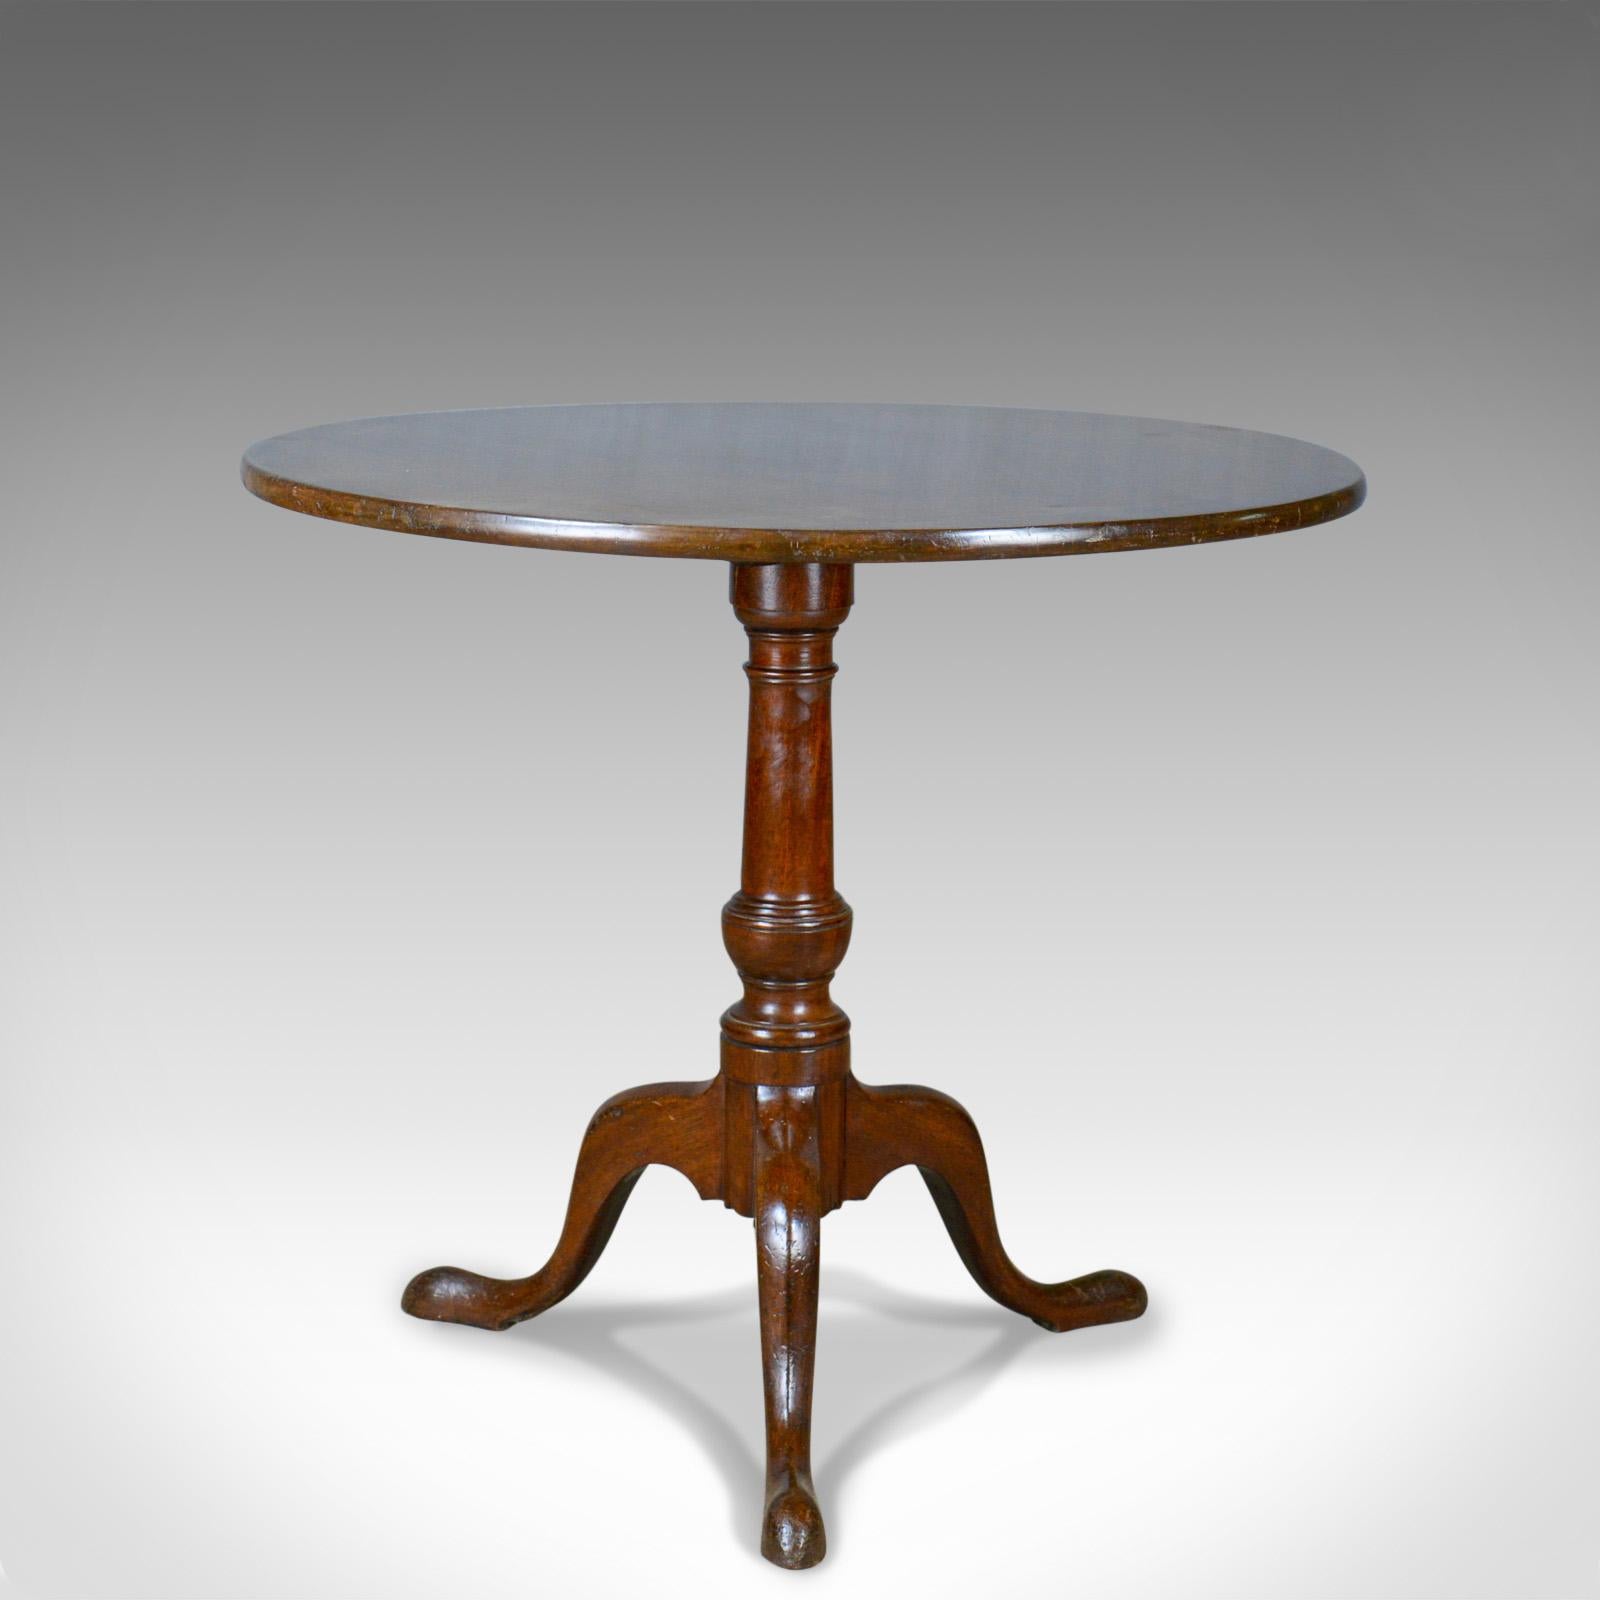 This is an antique tilt-top table, an English, mahogany side table dating to the early 19th century, circa 1800.

Appealing patina and grain interest in the mahogany
Good color depth shining through the wax polished finish
Modest proportions